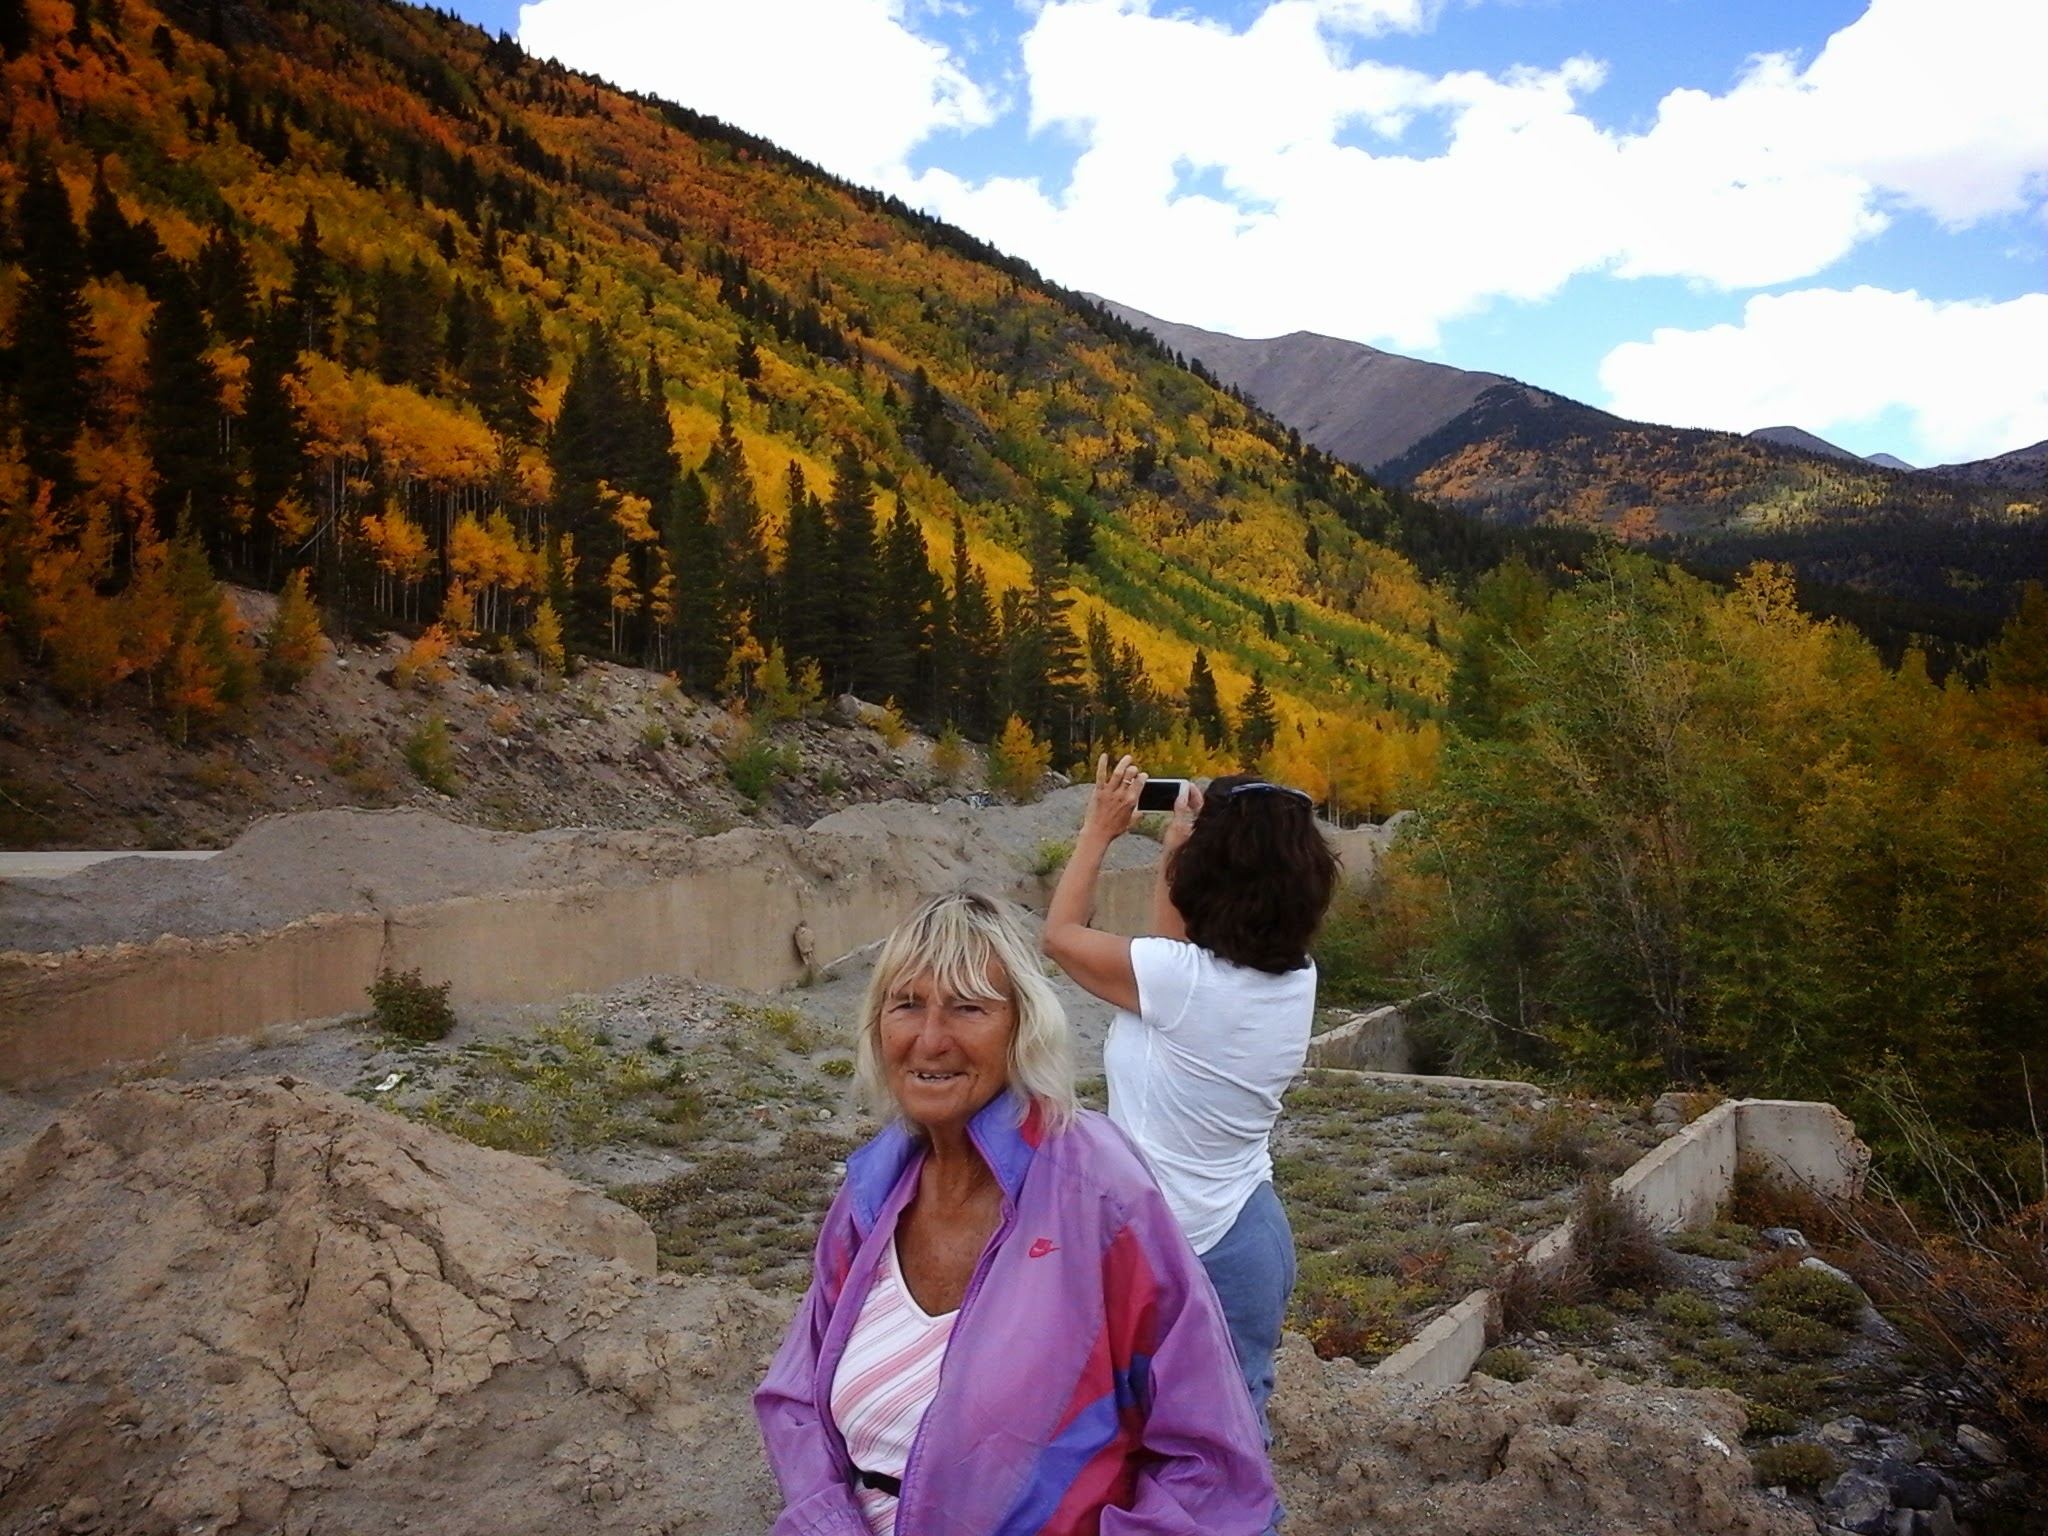 Two ladies taking photos of the fall colors in the mountains of Aspen Trees.